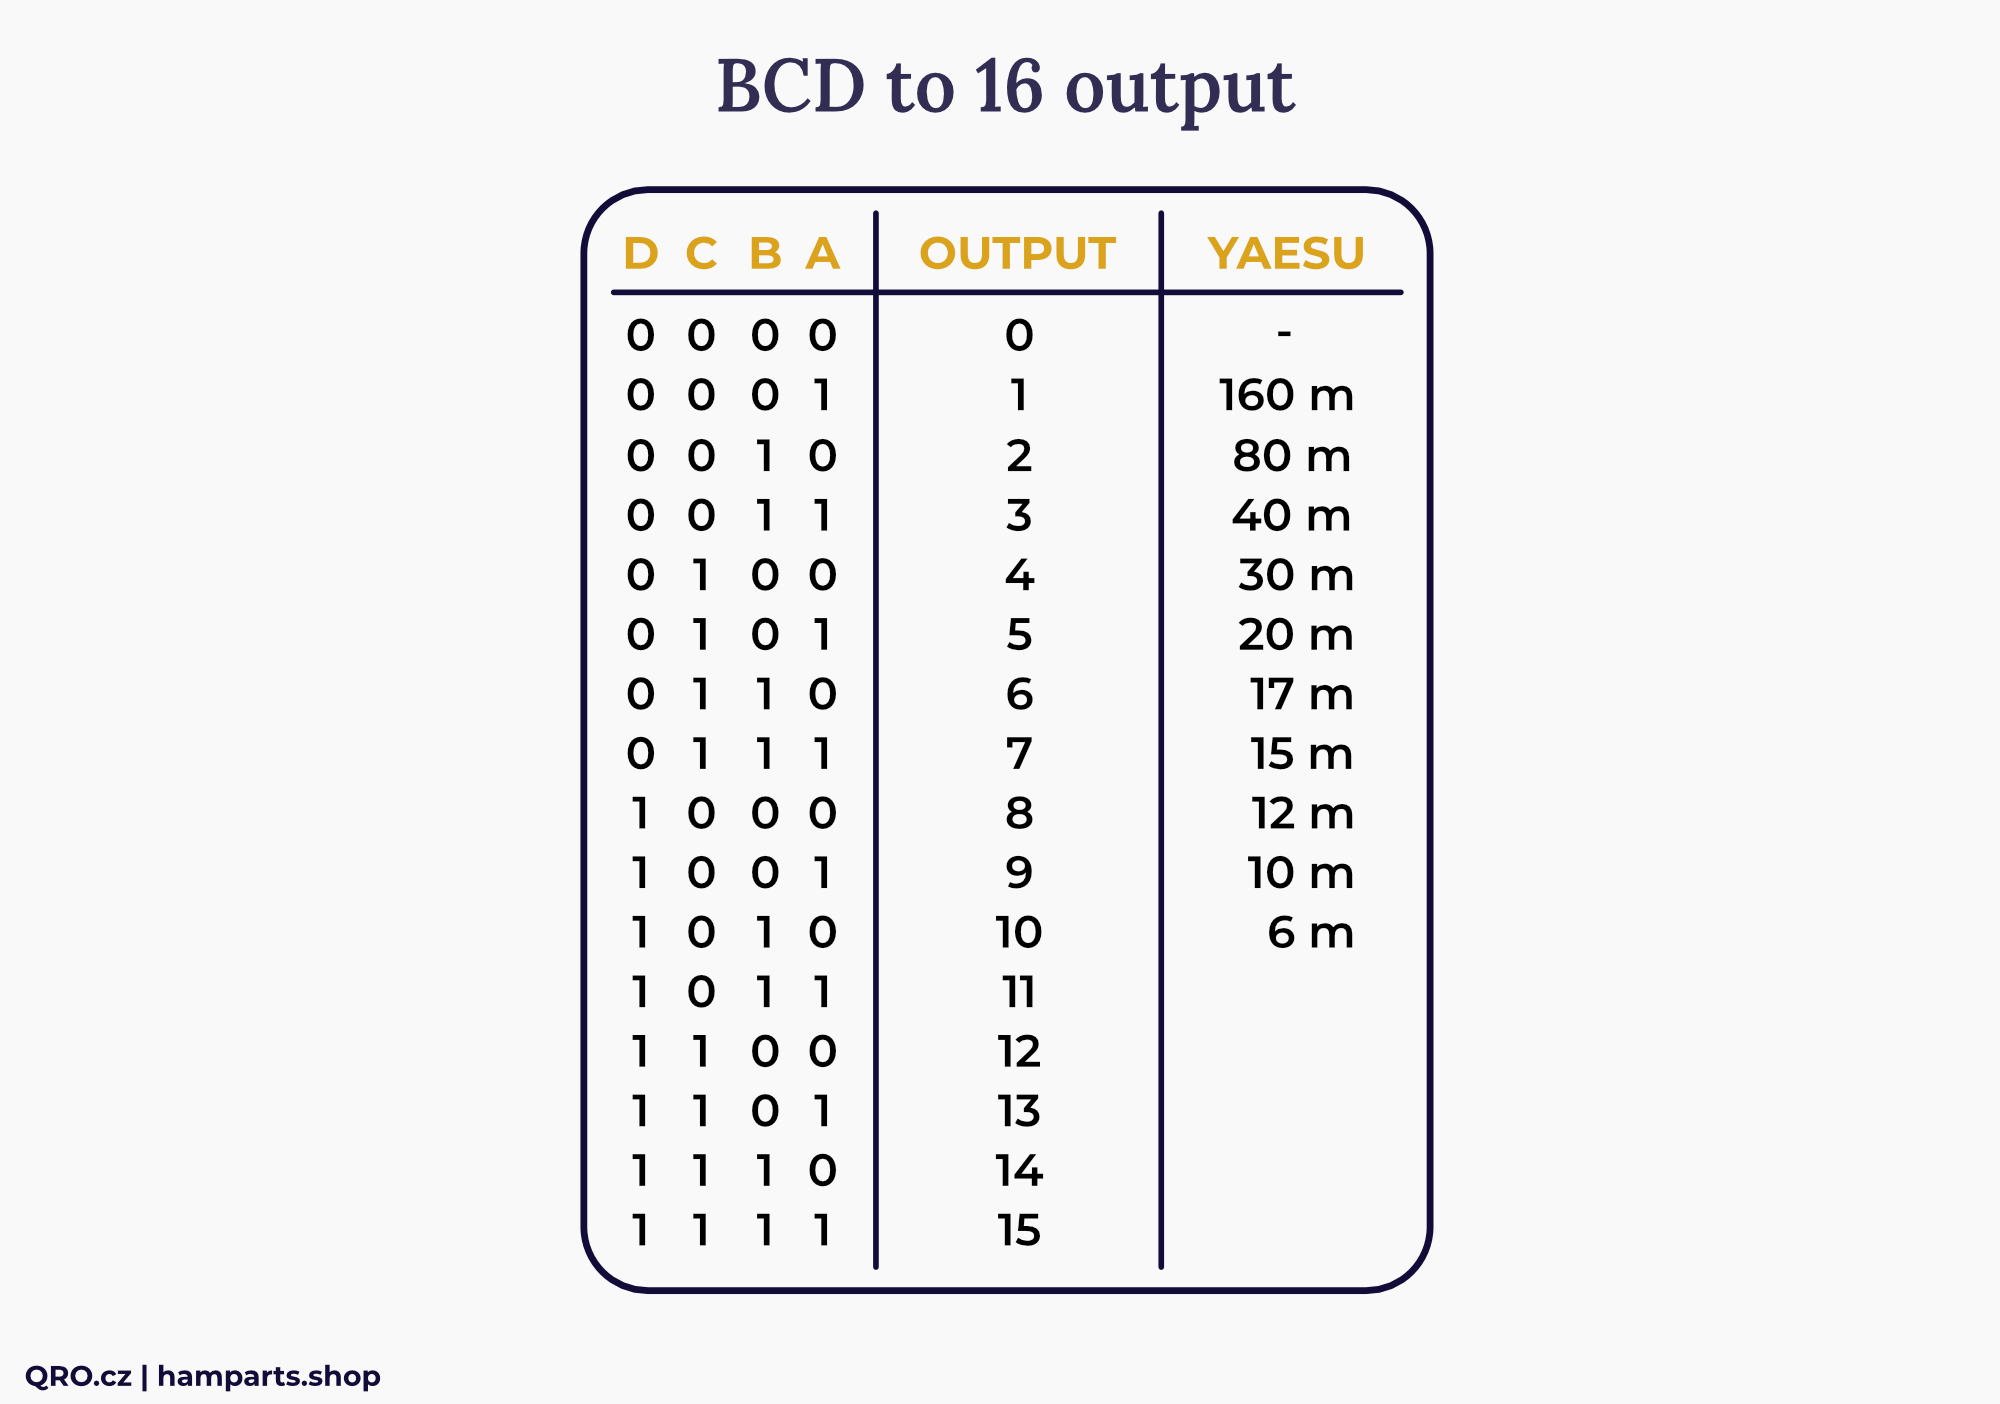 BCD to 16 converter matrix table for inputs and outputs by qro.cz hamparts.shop